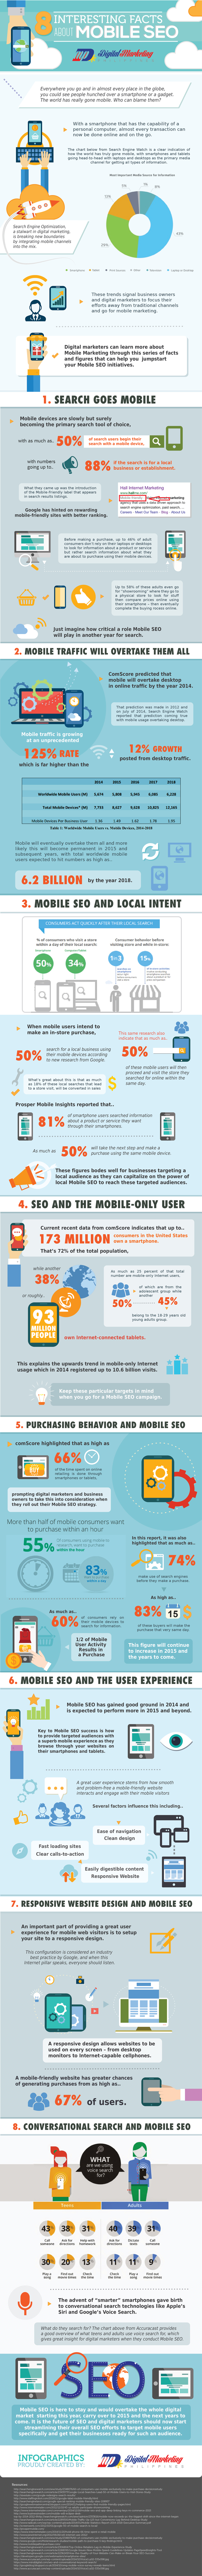 infographie-mobile-friendly-statistiques